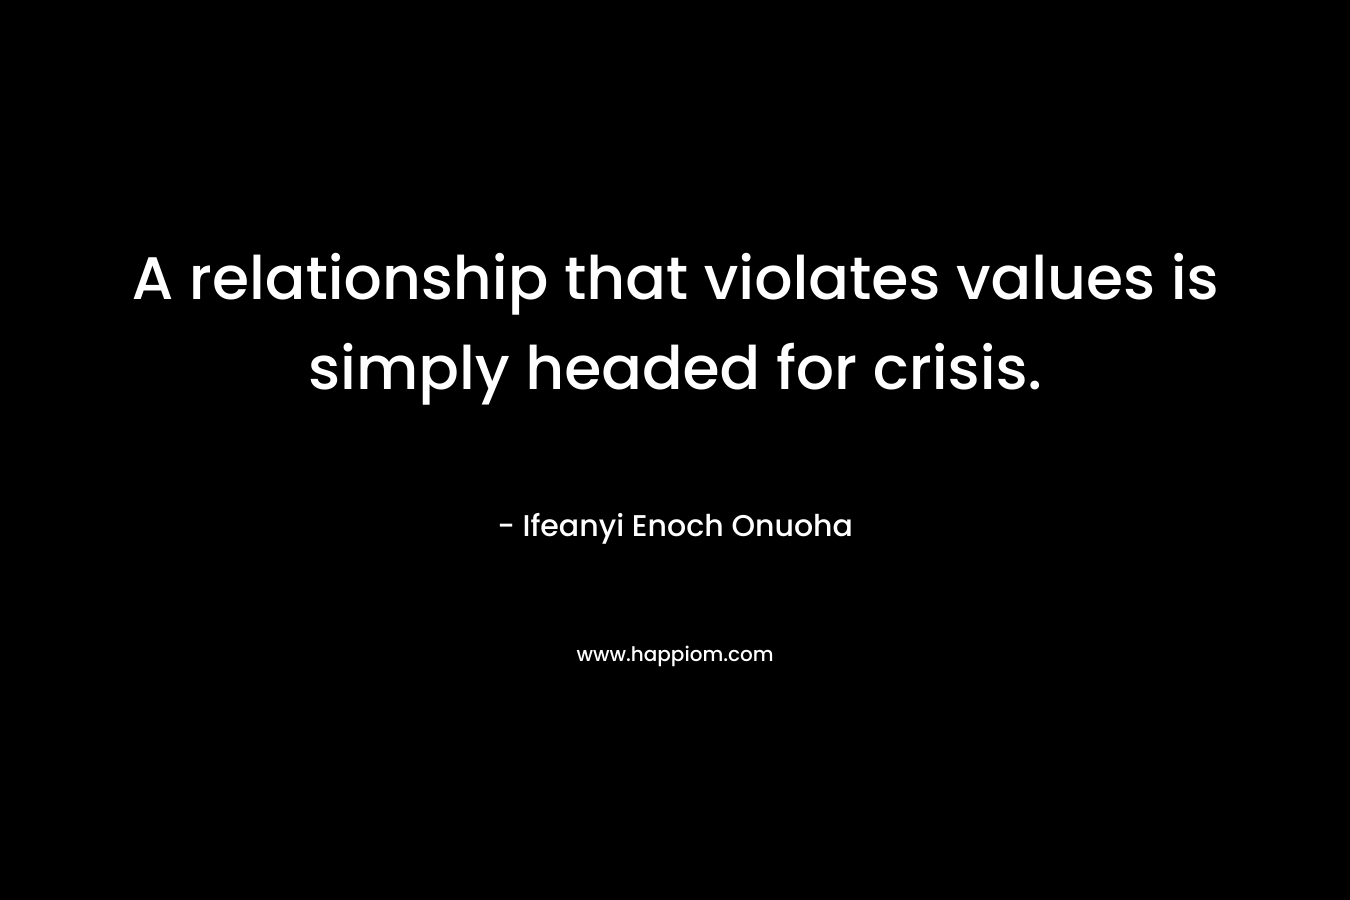 A relationship that violates values is simply headed for crisis. – Ifeanyi Enoch Onuoha